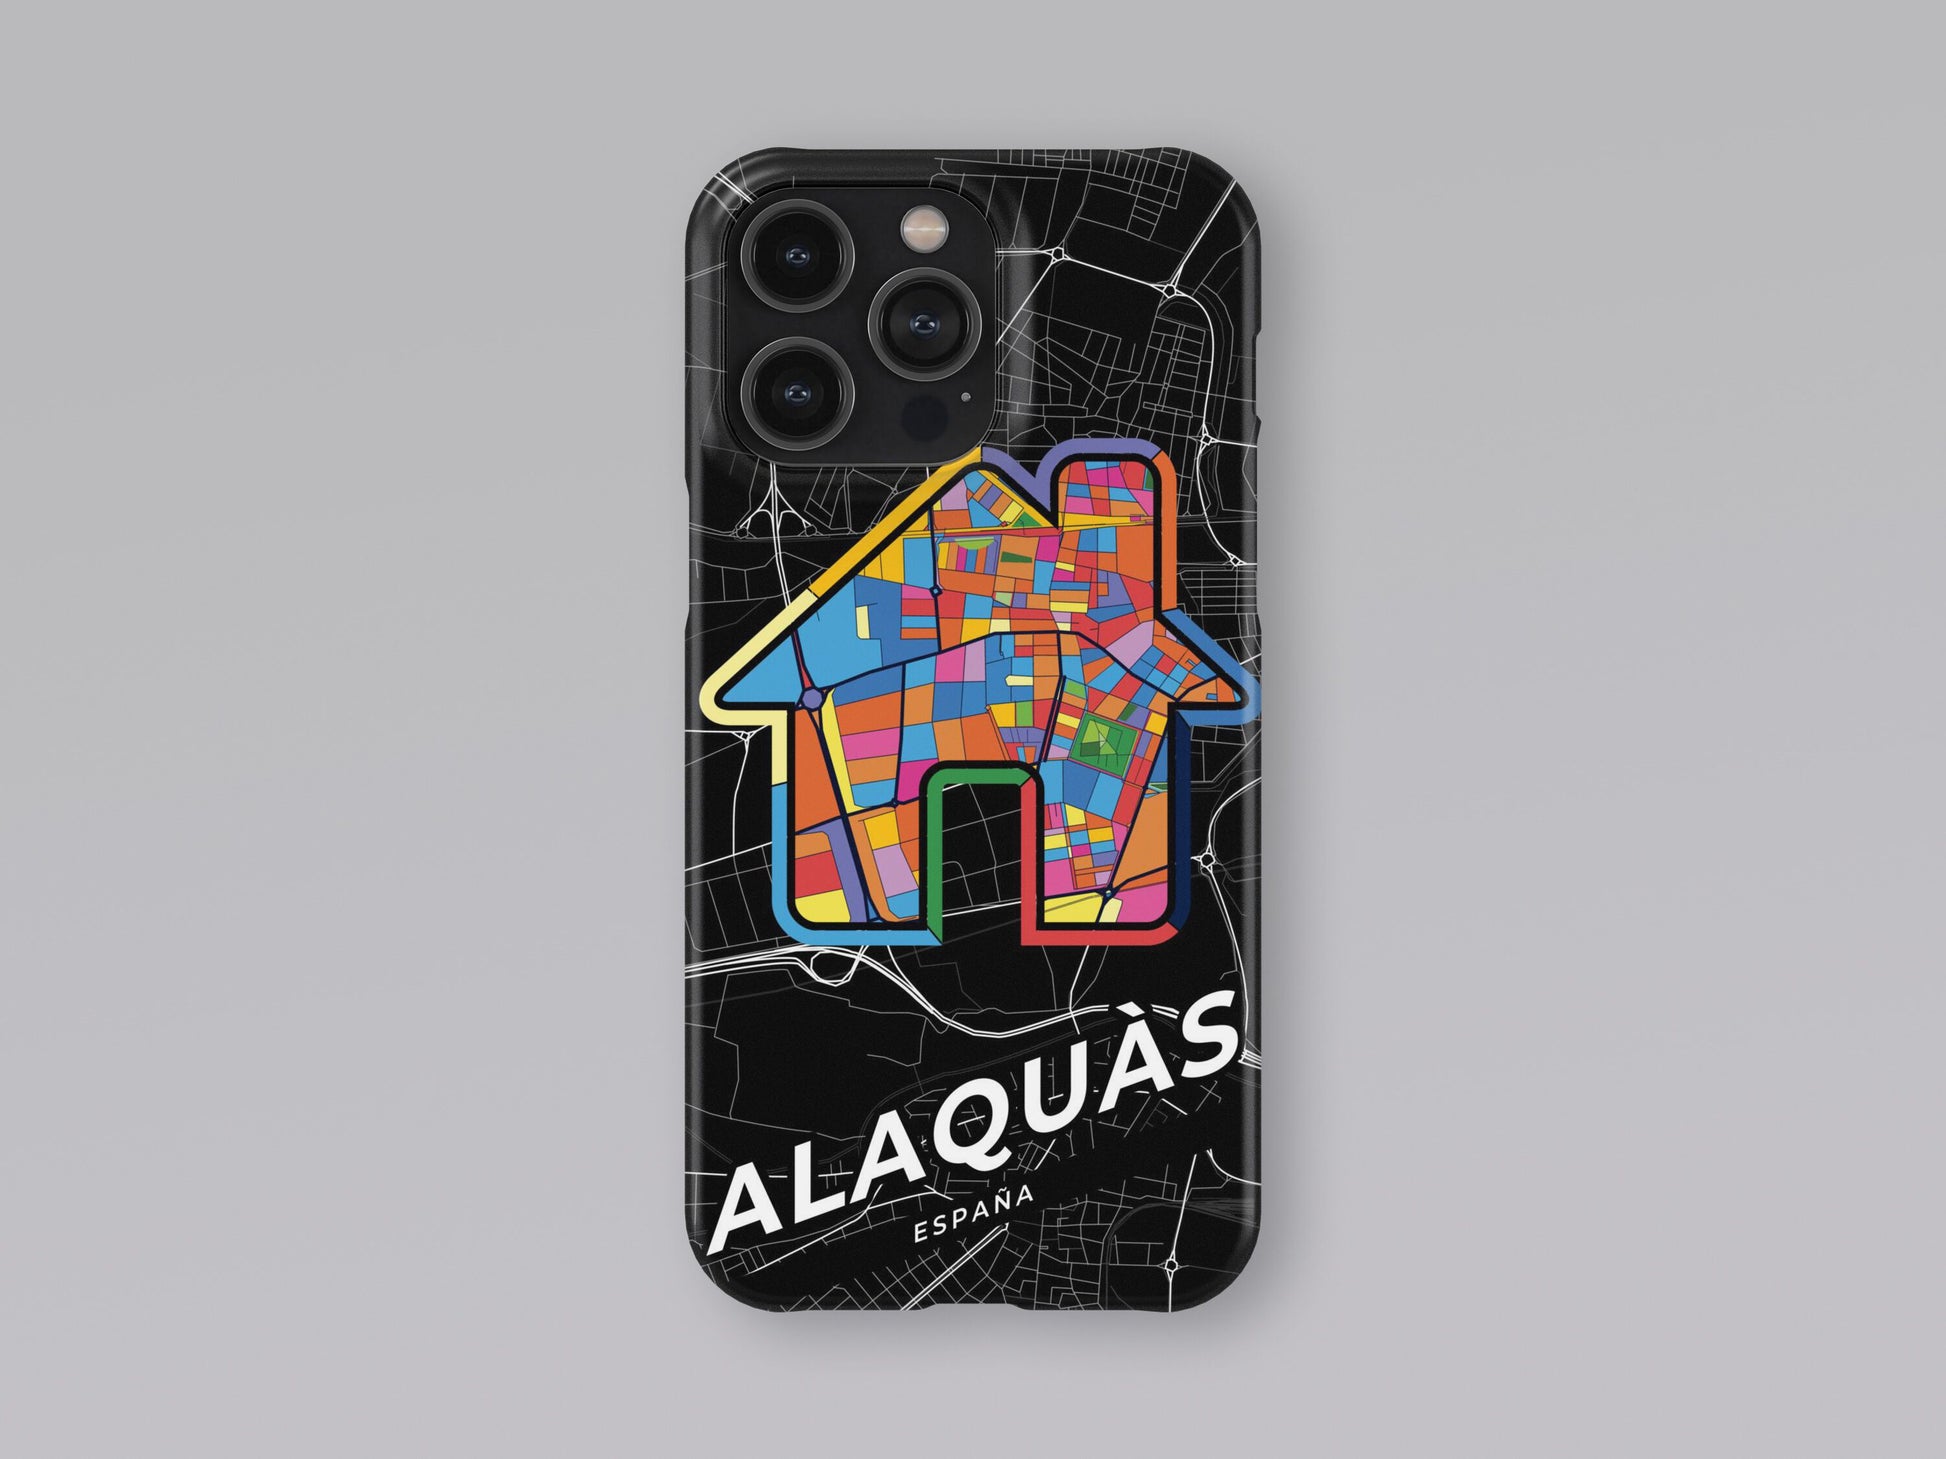 Alaquàs Spain slim phone case with colorful icon. Birthday, wedding or housewarming gift. Couple match cases. 3